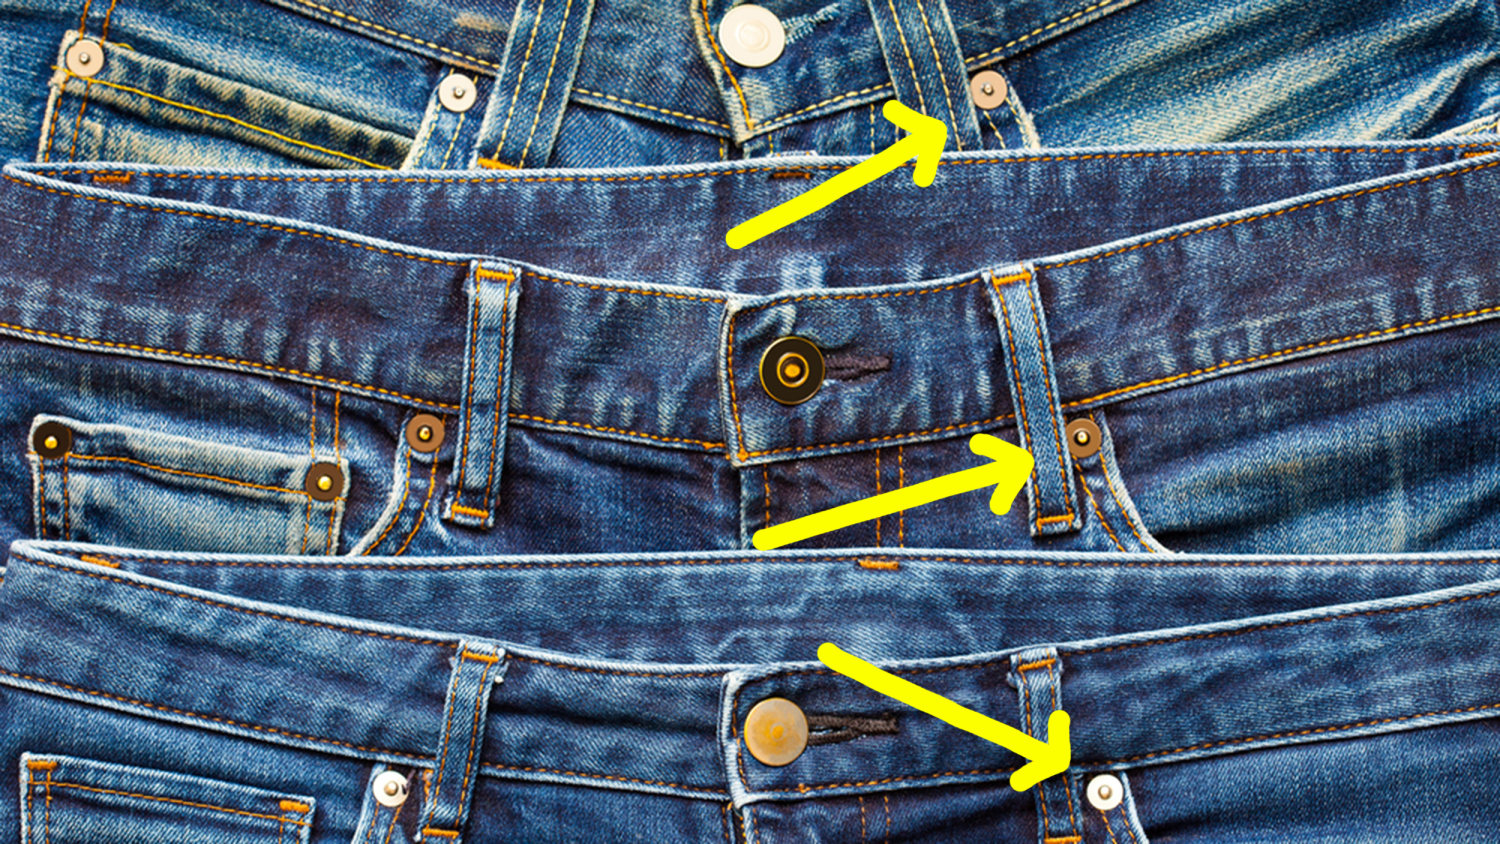 Jean rivets: What are those little studs actually for?